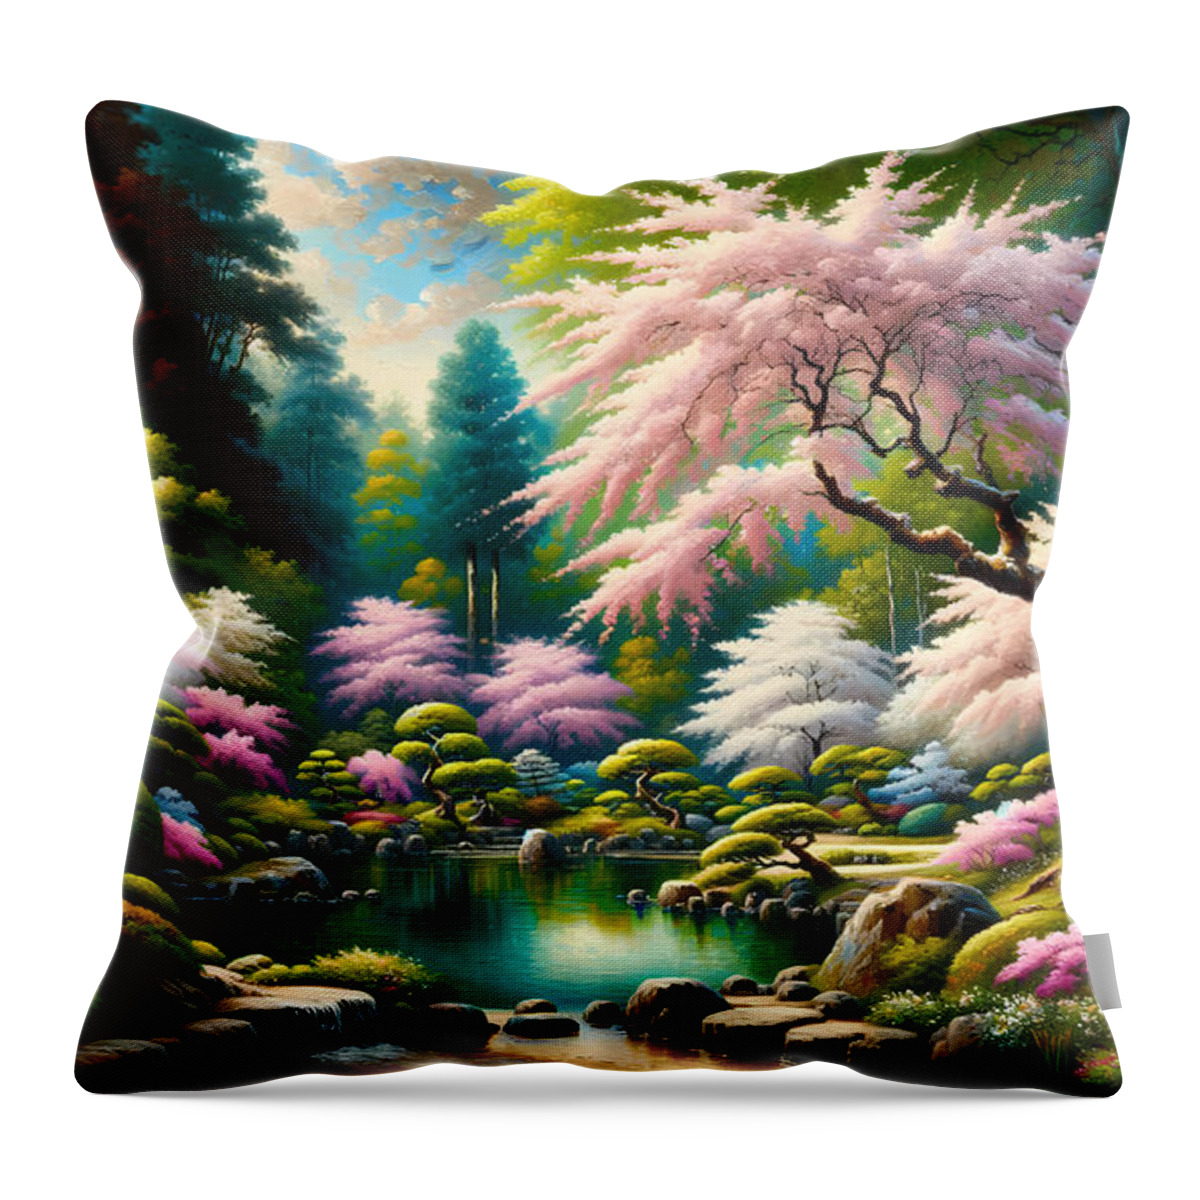 Cherry Throw Pillow featuring the painting A traditional Japanese garden with cherry blossoms in full bloom by Jeff Creation